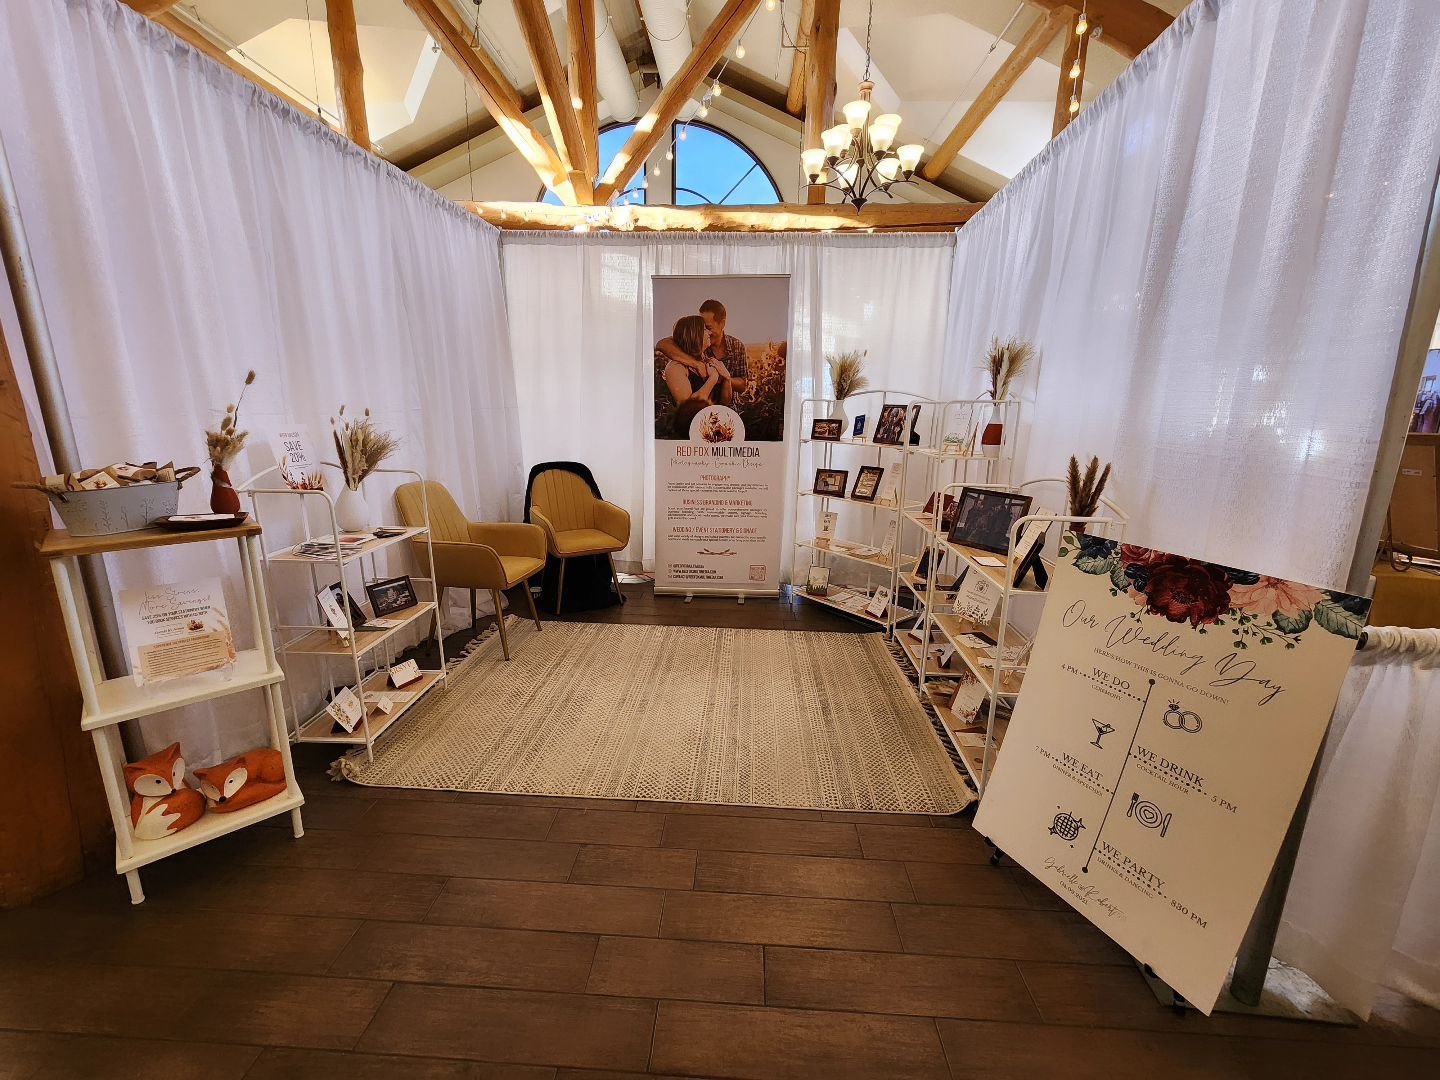 All set up and ready to go! 

Come visit our booth and all the other amazing vendors at the Cochrane Wedding Fair!

Today 10am-4pm at the @cochraneranchehouse 

#WeddingSeason #weddingfair #Cochrane #gettingmarried #WeddingPlanning #stationerydesigne